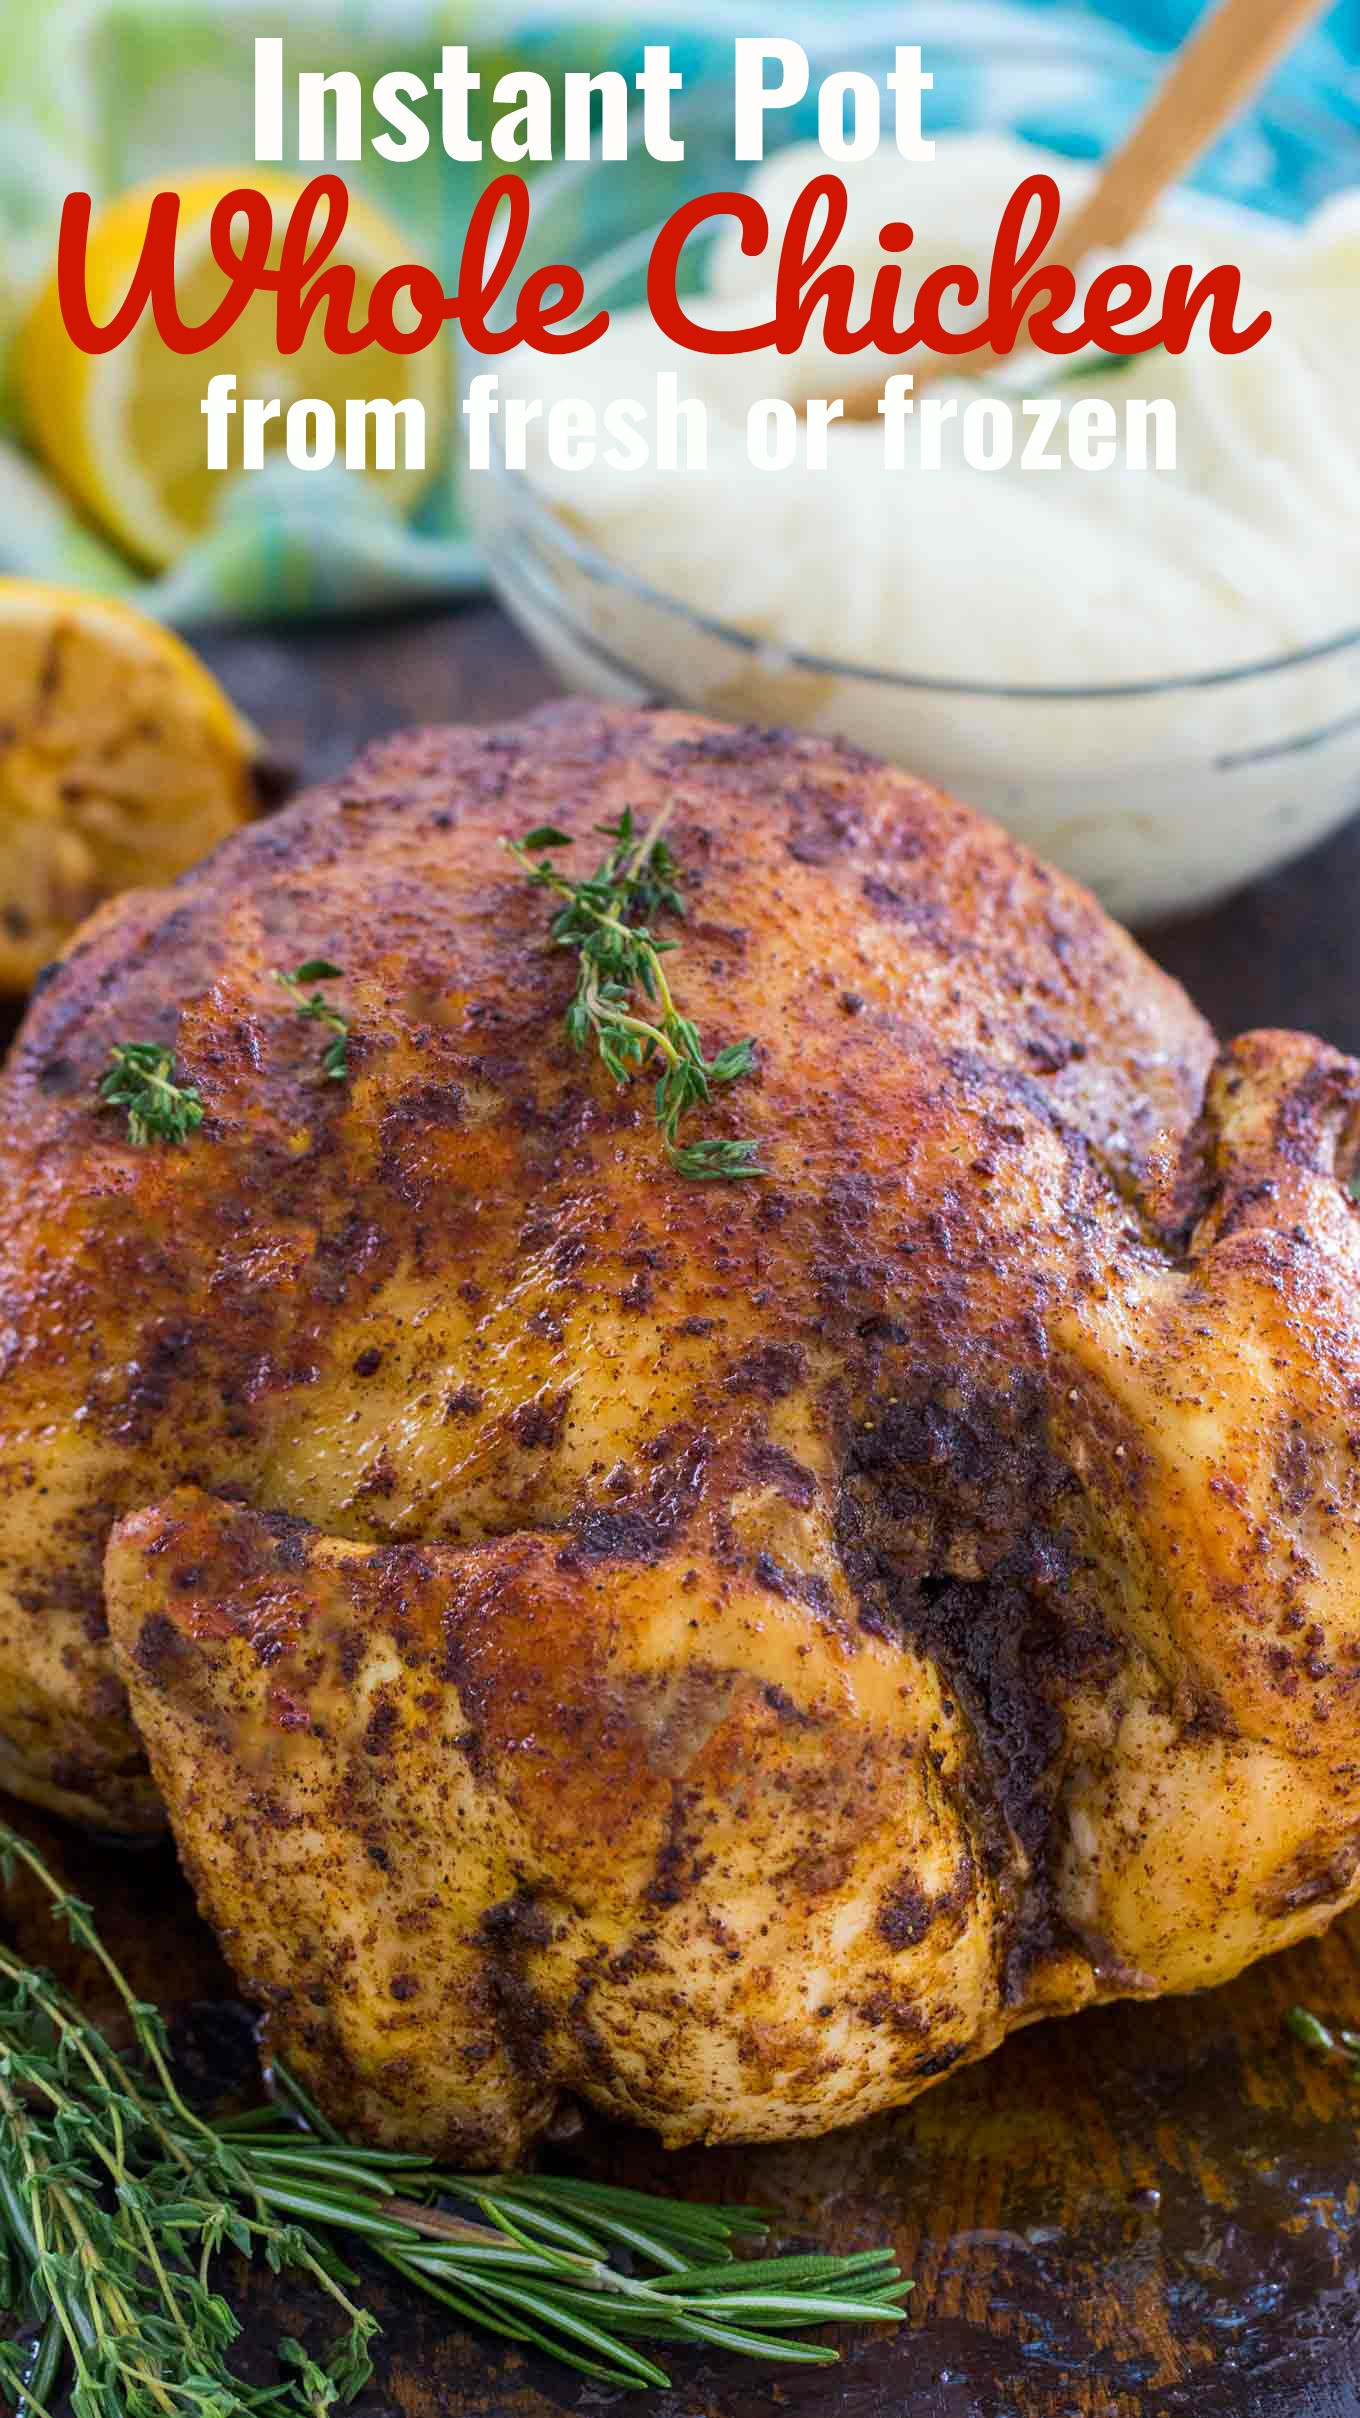 Roasted Chicken Instant Pot
 Instant Pot Whole Chicken Recipe Fresh or Frozen Video